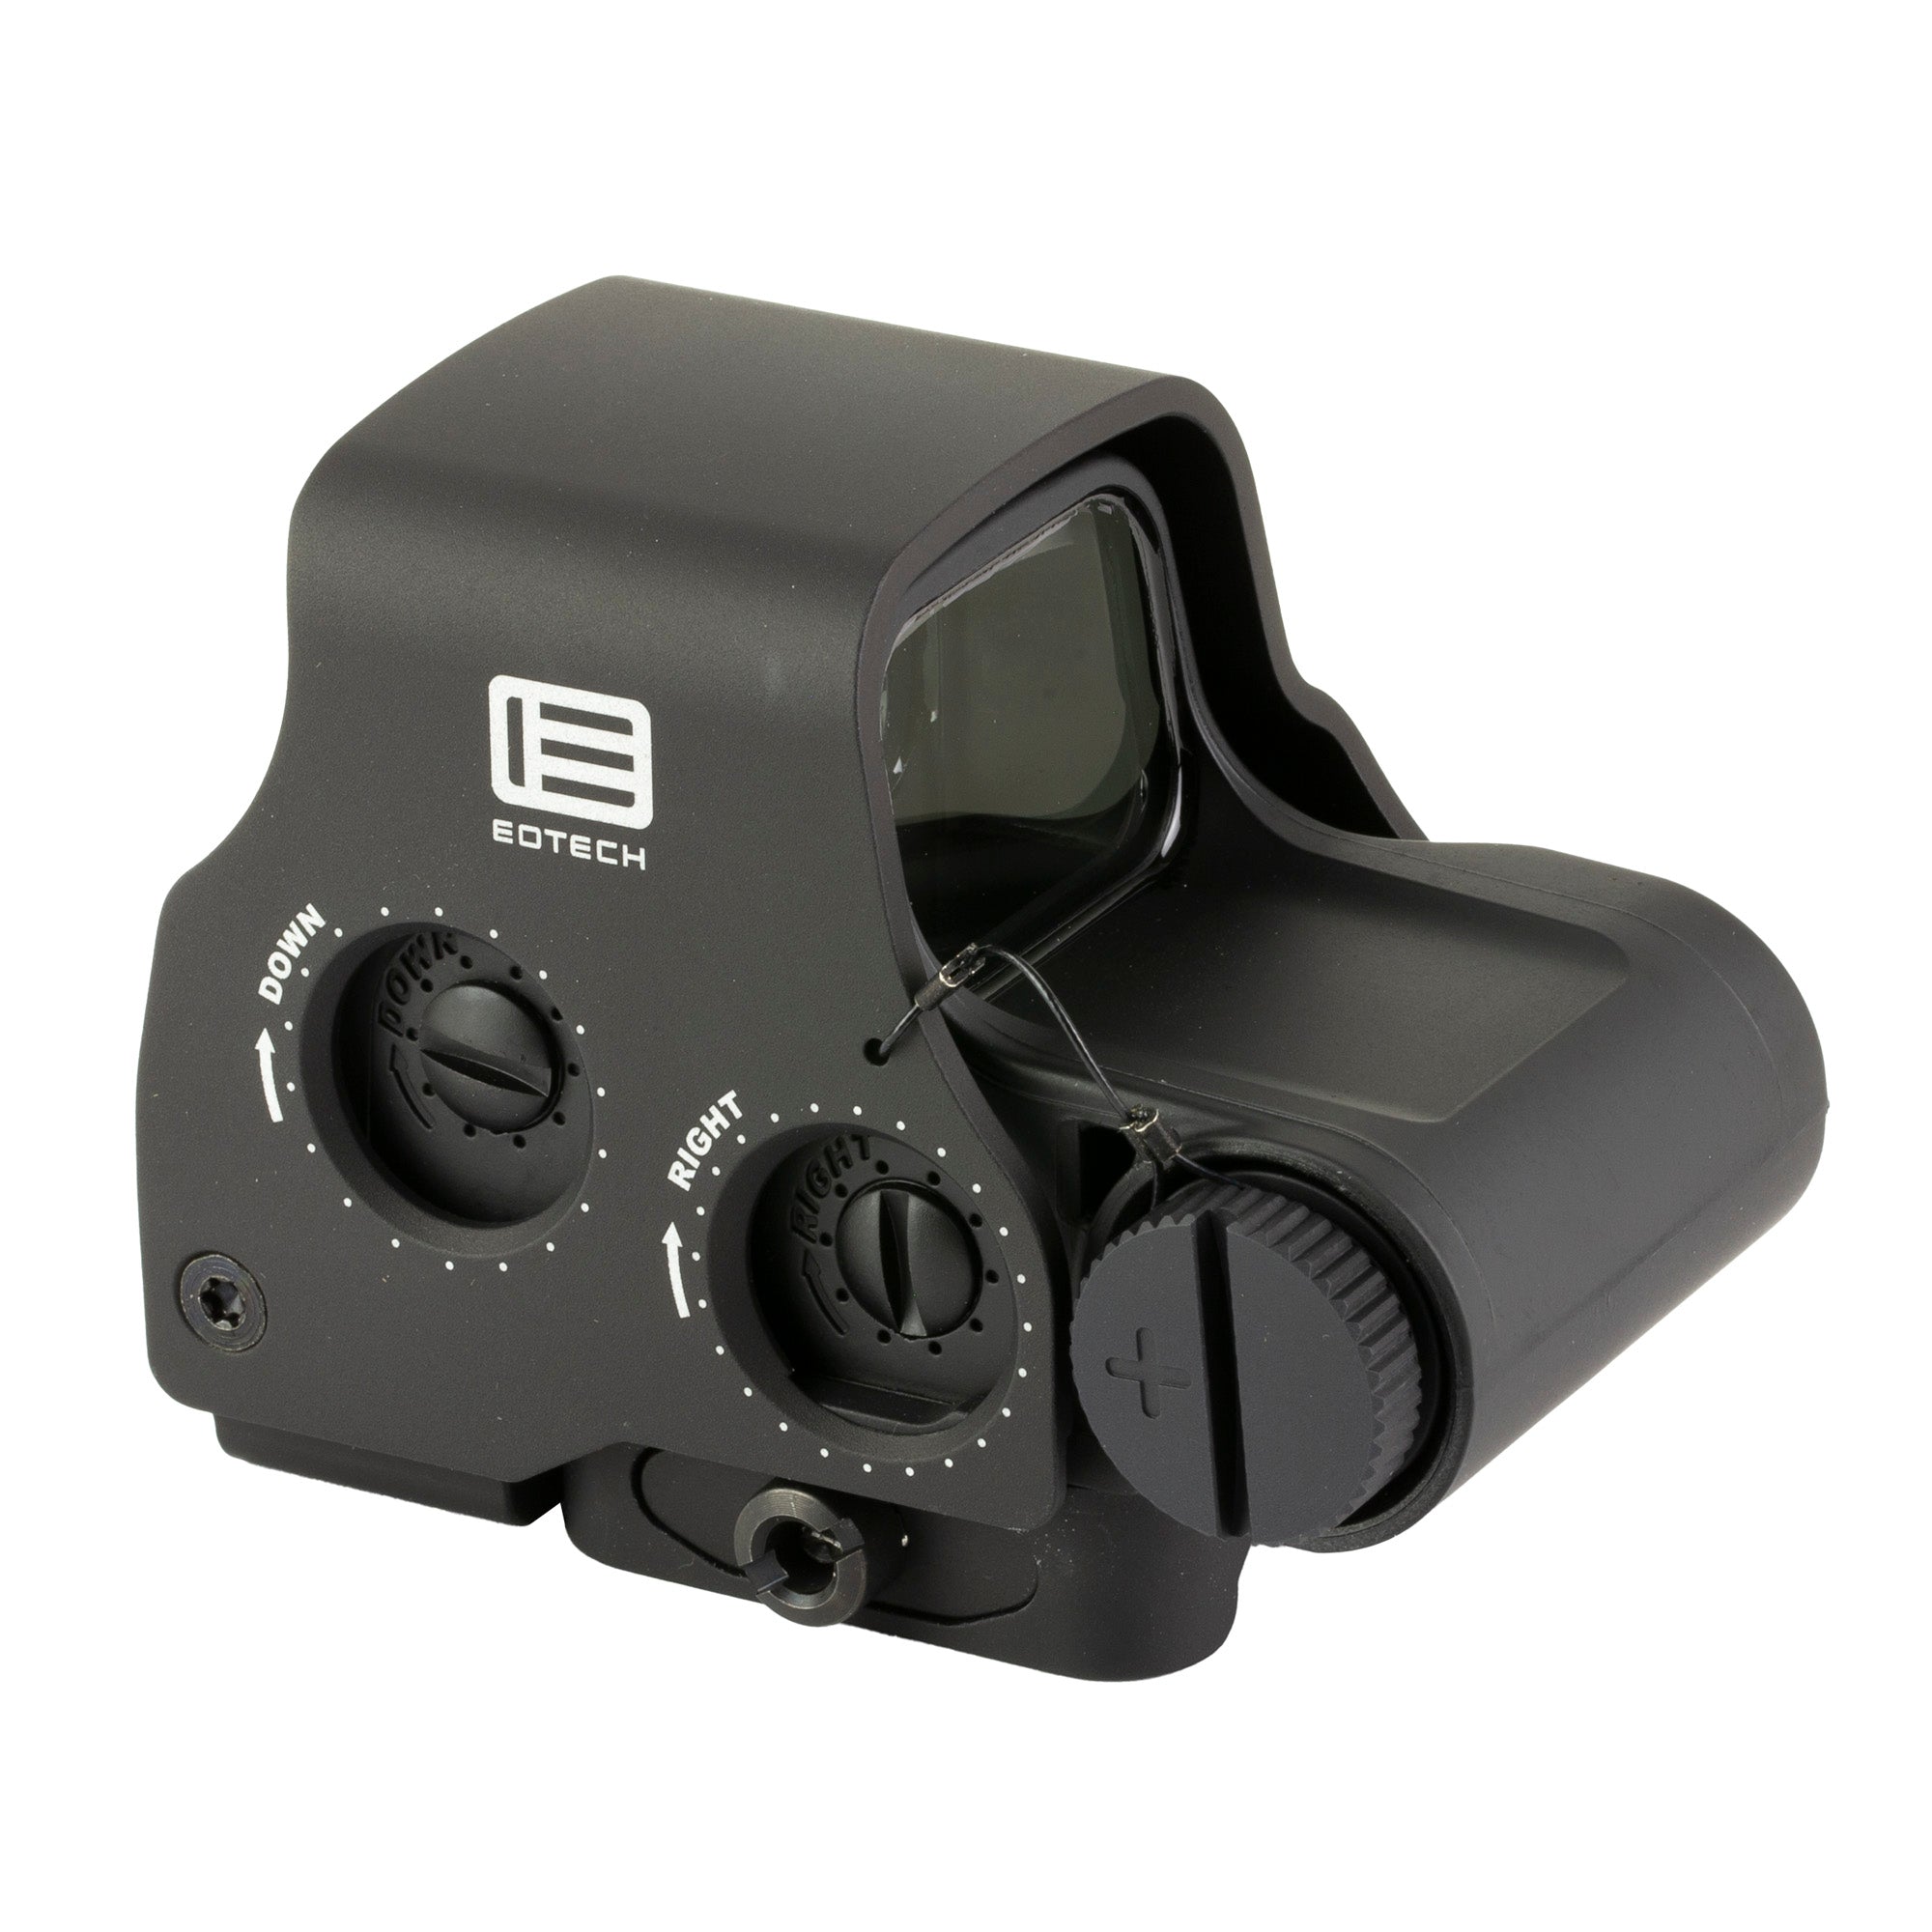 EOTech EXPS3 Holographic Sight in Black with Red 68 MOA Ring and 1 MOA Dot, night vision compatible, featuring quick disconnect mount